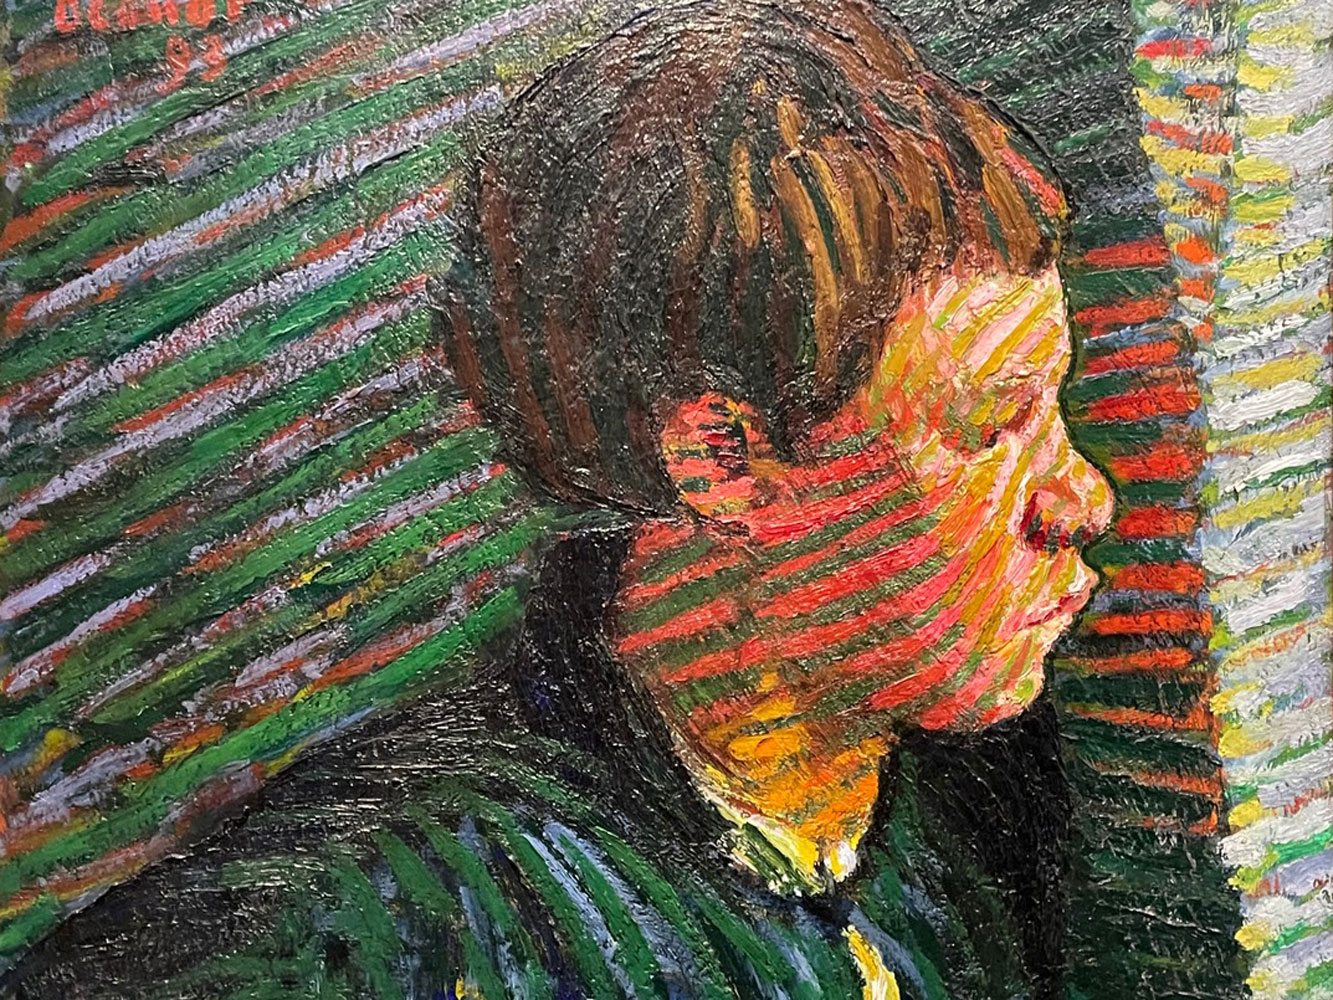 Roderic O’Conor at Musée d’Orsay